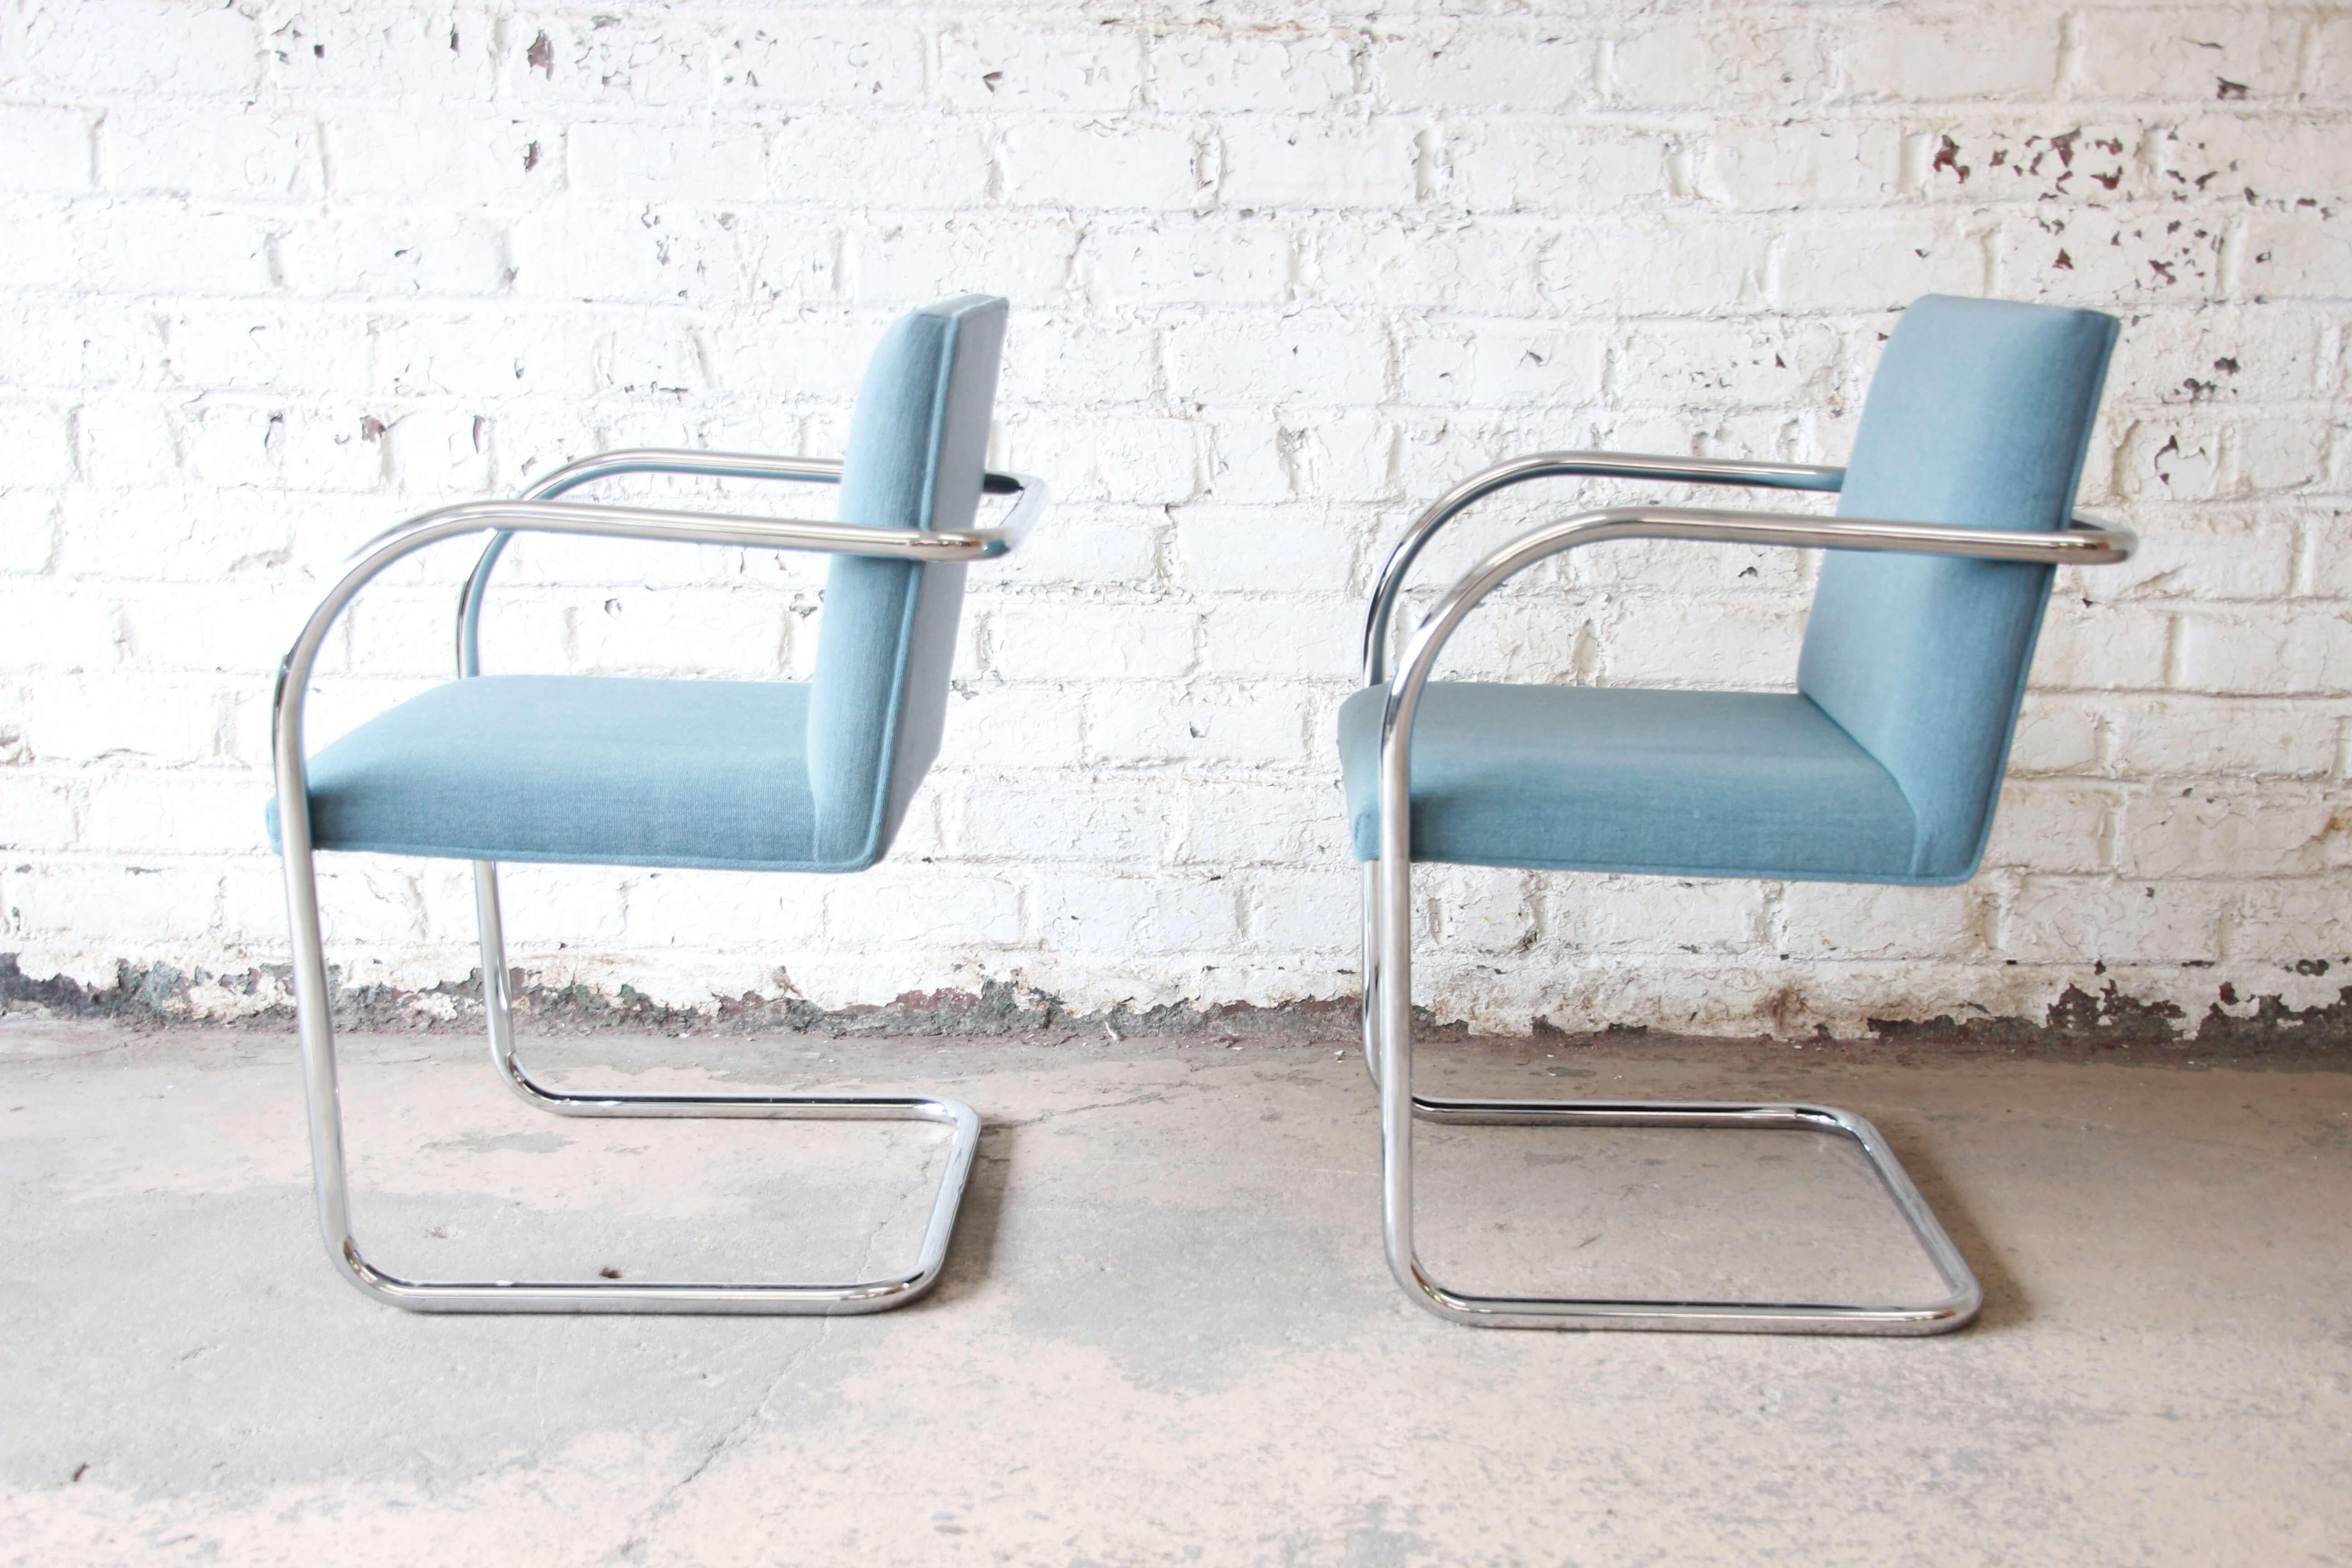 Offering a very nice set of Brno chairs by Gordon International. The chairs feature nice chrome frames with a clean light blue upholstery. The chairs are comfortable with strong foam webbing and in excellent vintage condition. Eighteen chairs